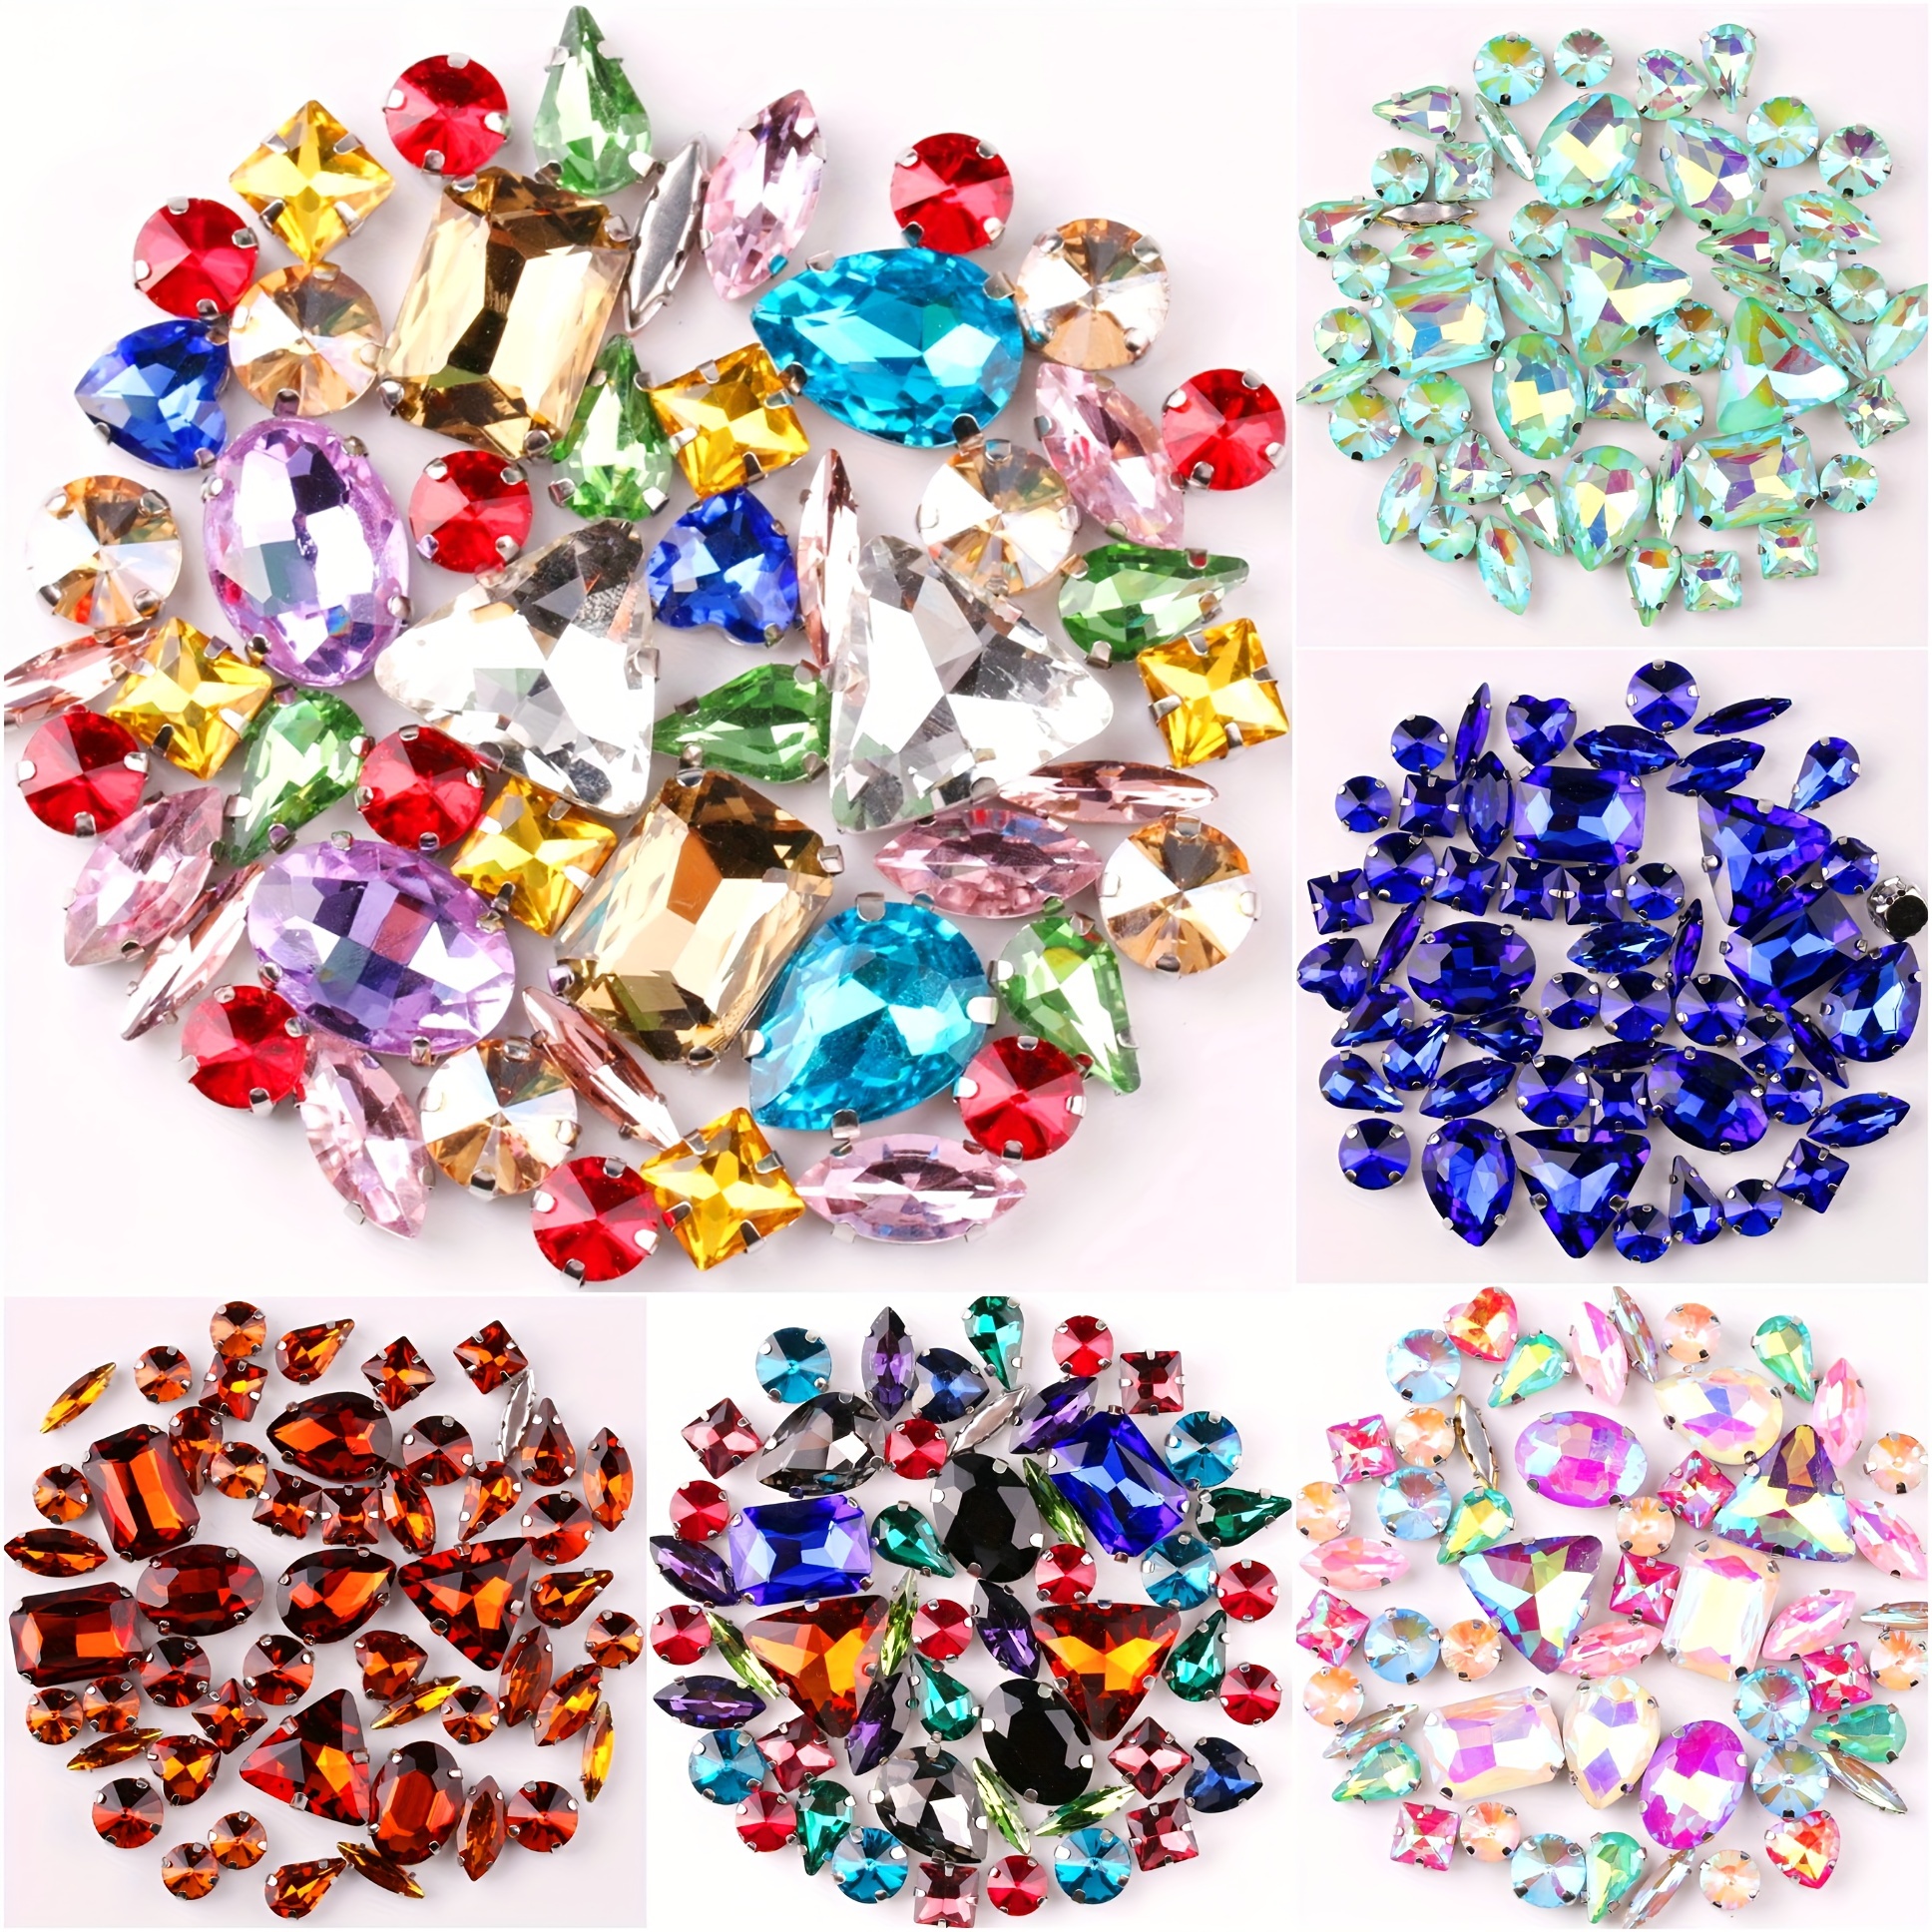 Hotfix Set Of Rhinestones &; Round Flat Back In Colored Glass With Crystal  Clear And Transparent Ab 6 Sizes 12 Colors Rhinestones For Crafts, Clothes